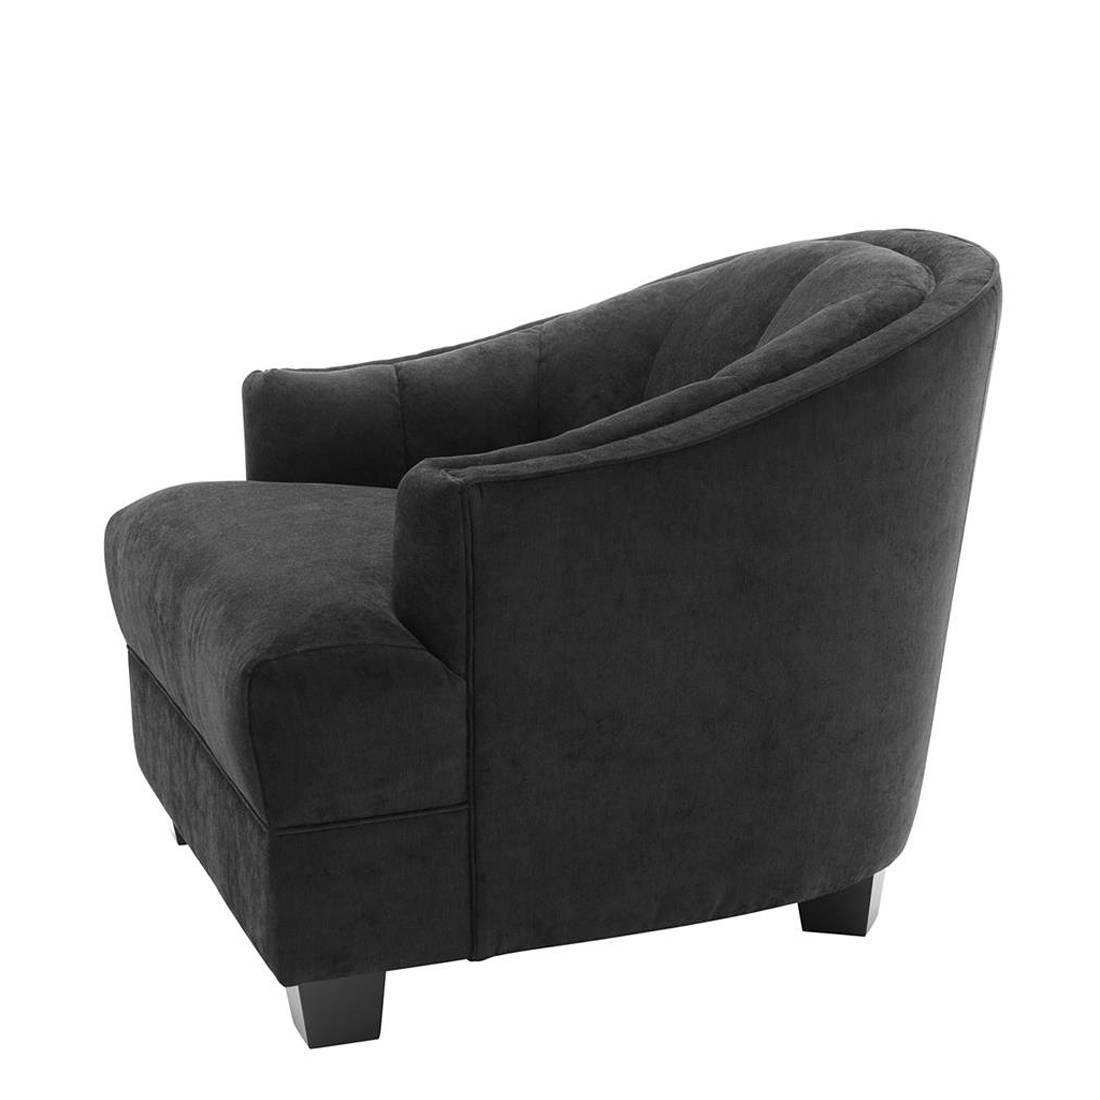 Armchair Karam with structure in solid wood,
upholstered in black velvet, fire retardant treatment.
With black wooden feet.
Also available in ecru velvet. 
 